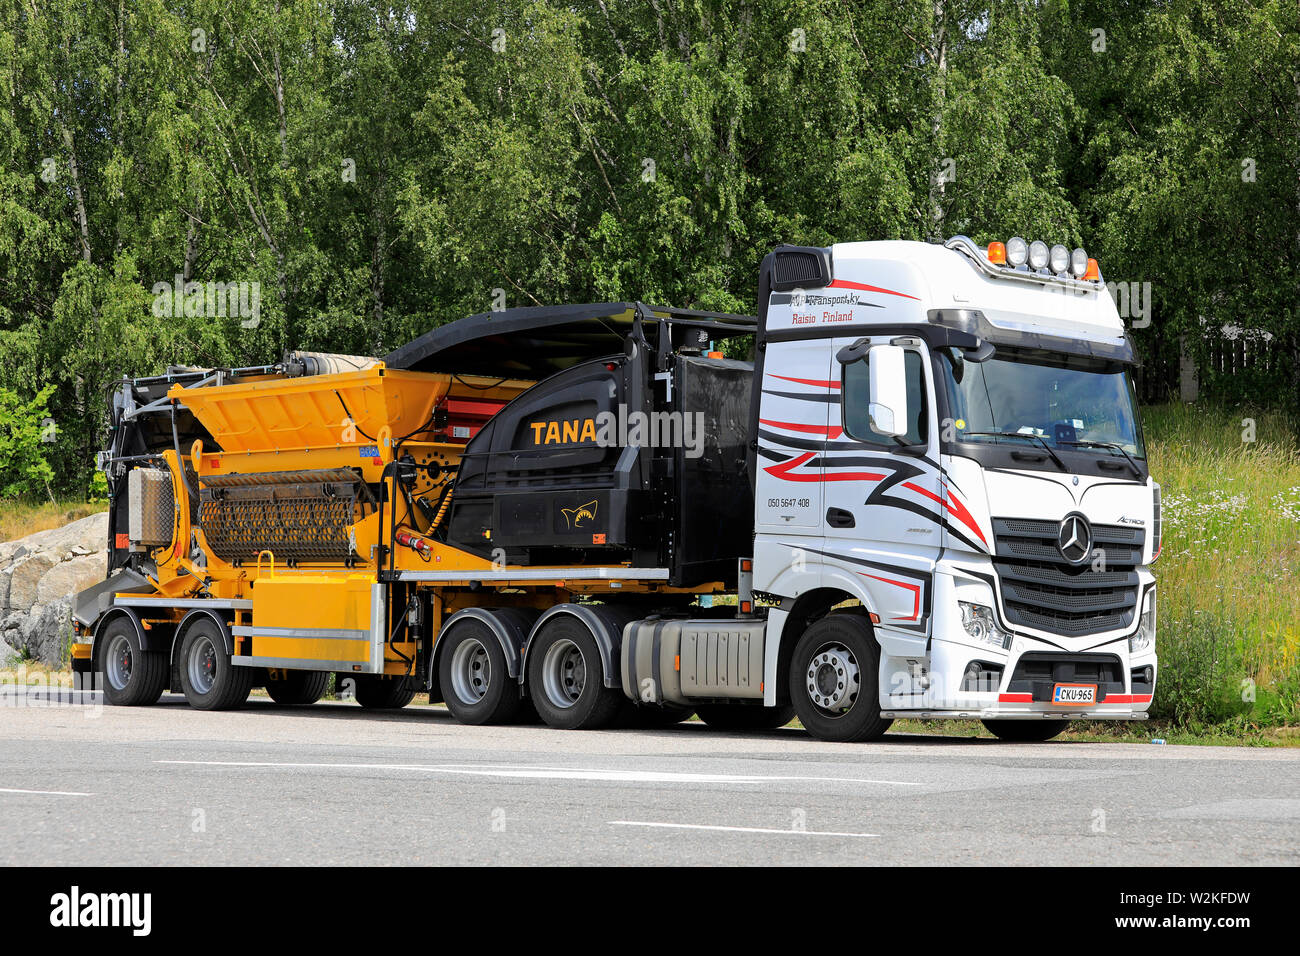 Salo, Finland. June 29, 2019. Mercedes-Benz Actros 2653 truck of AJP Transport Ky hauling TANA Shark waste shredder parked on a truck stop yard. Stock Photo